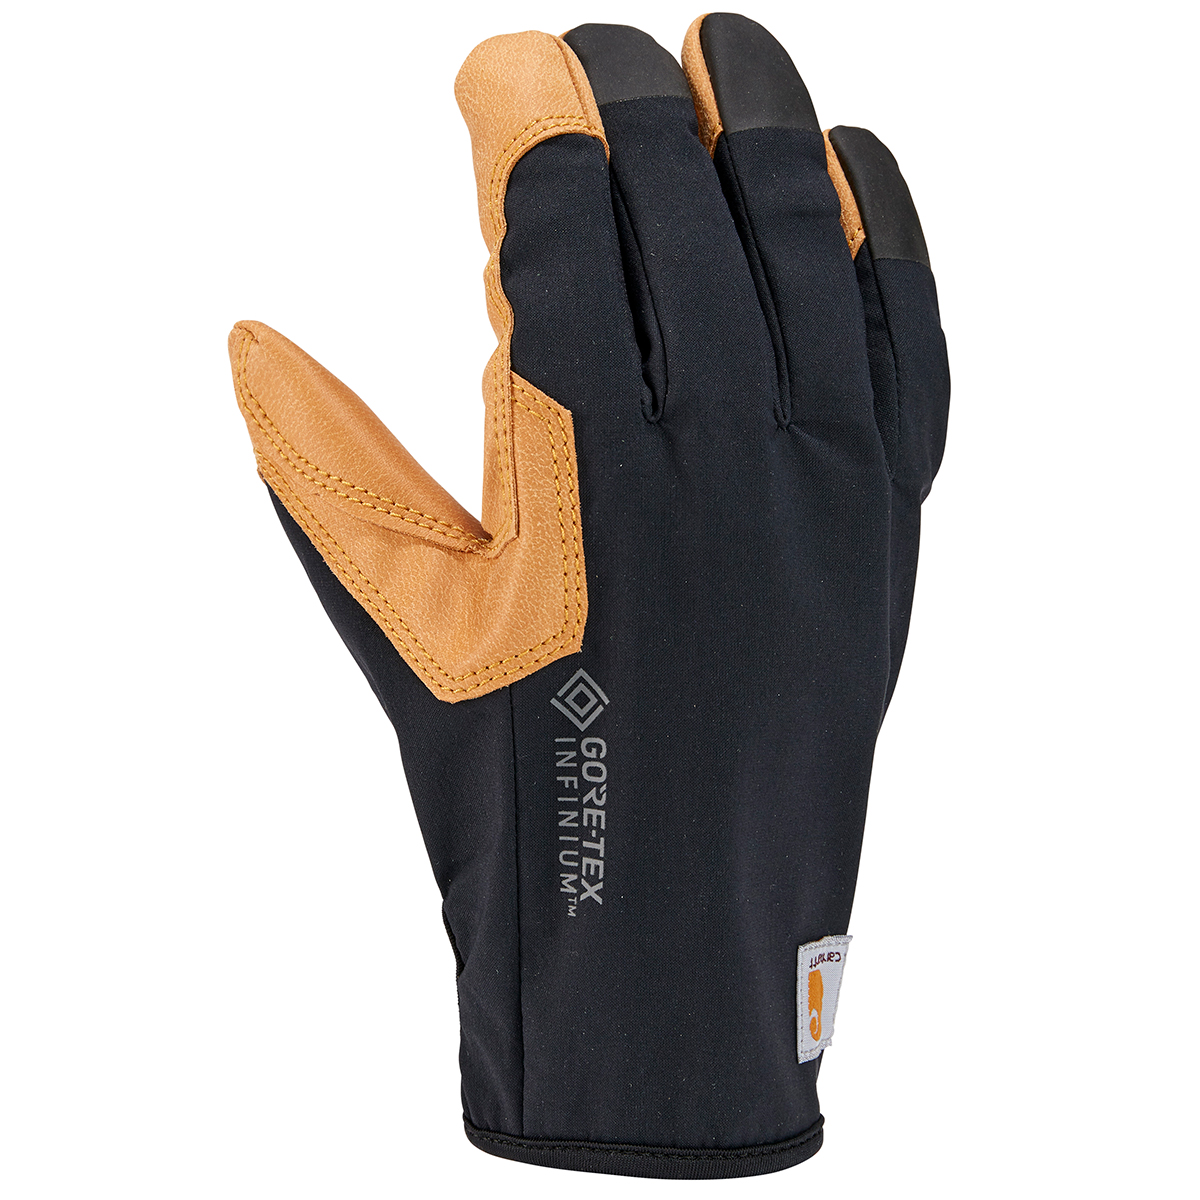 Carhartt Men's Gore-Tex Infinium Synthetic Leather Secure Cuff Glove